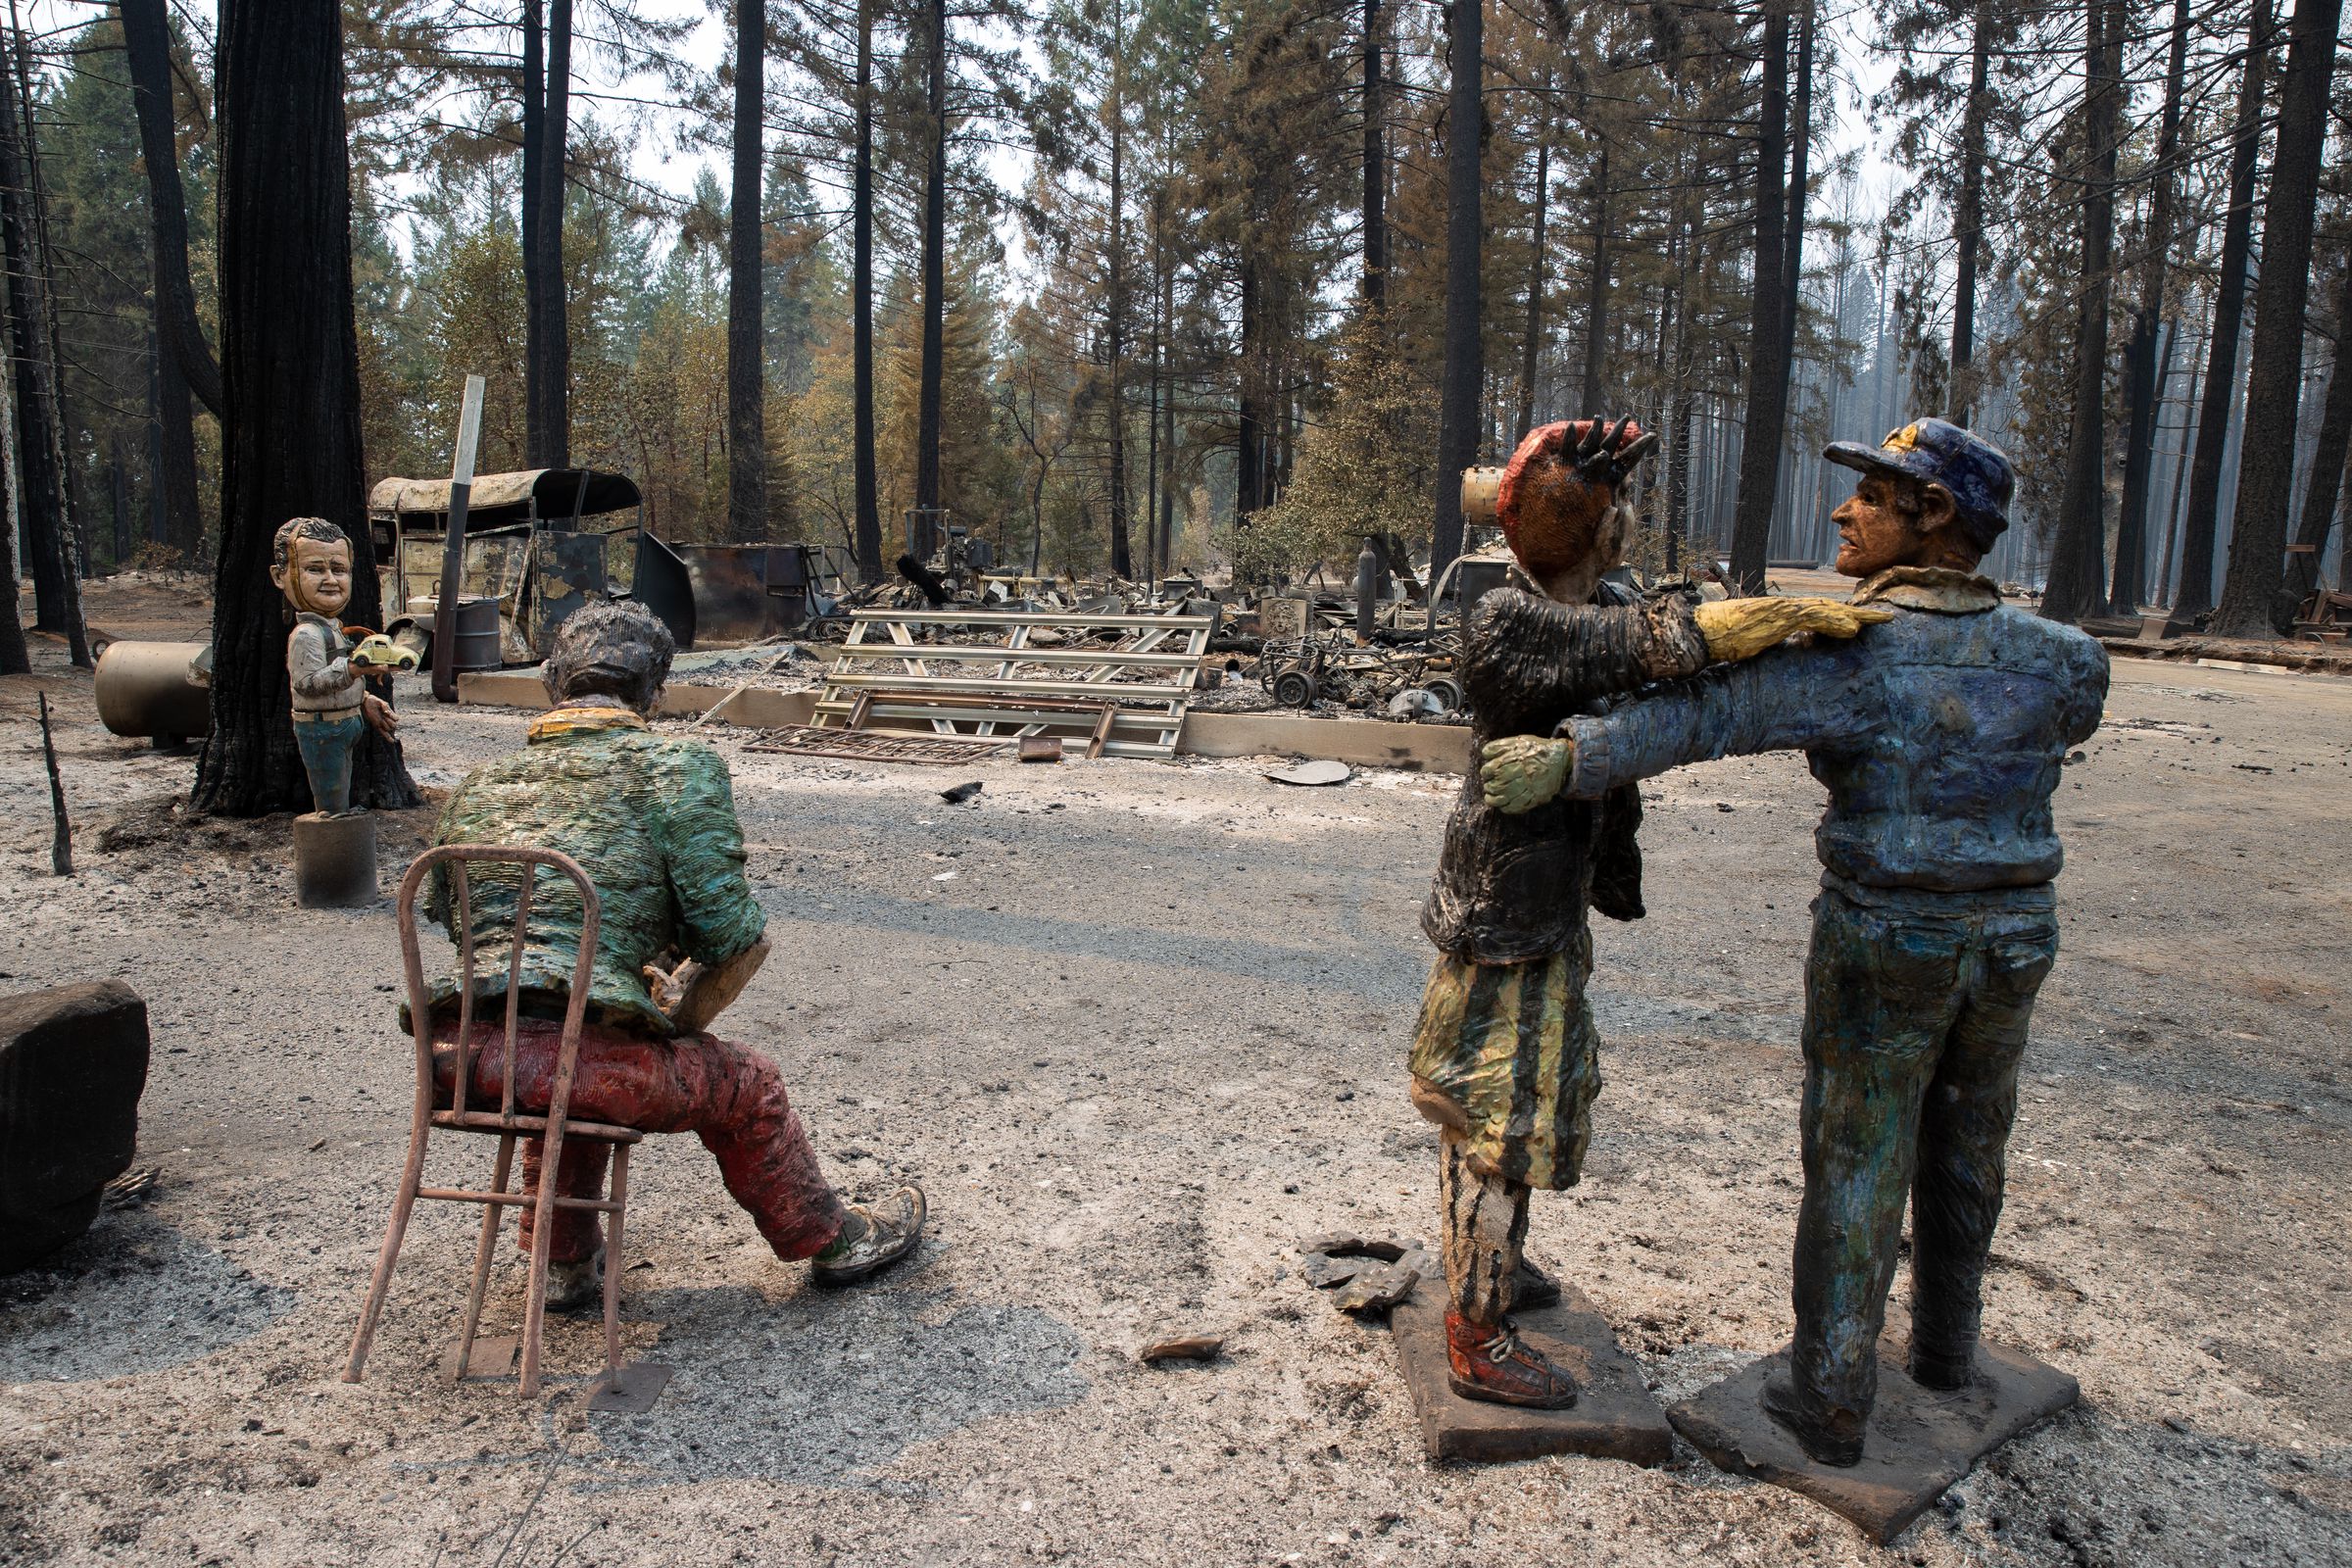 Statues of people are left behind amid the ruins of structures burned by the Mosquito Fire.